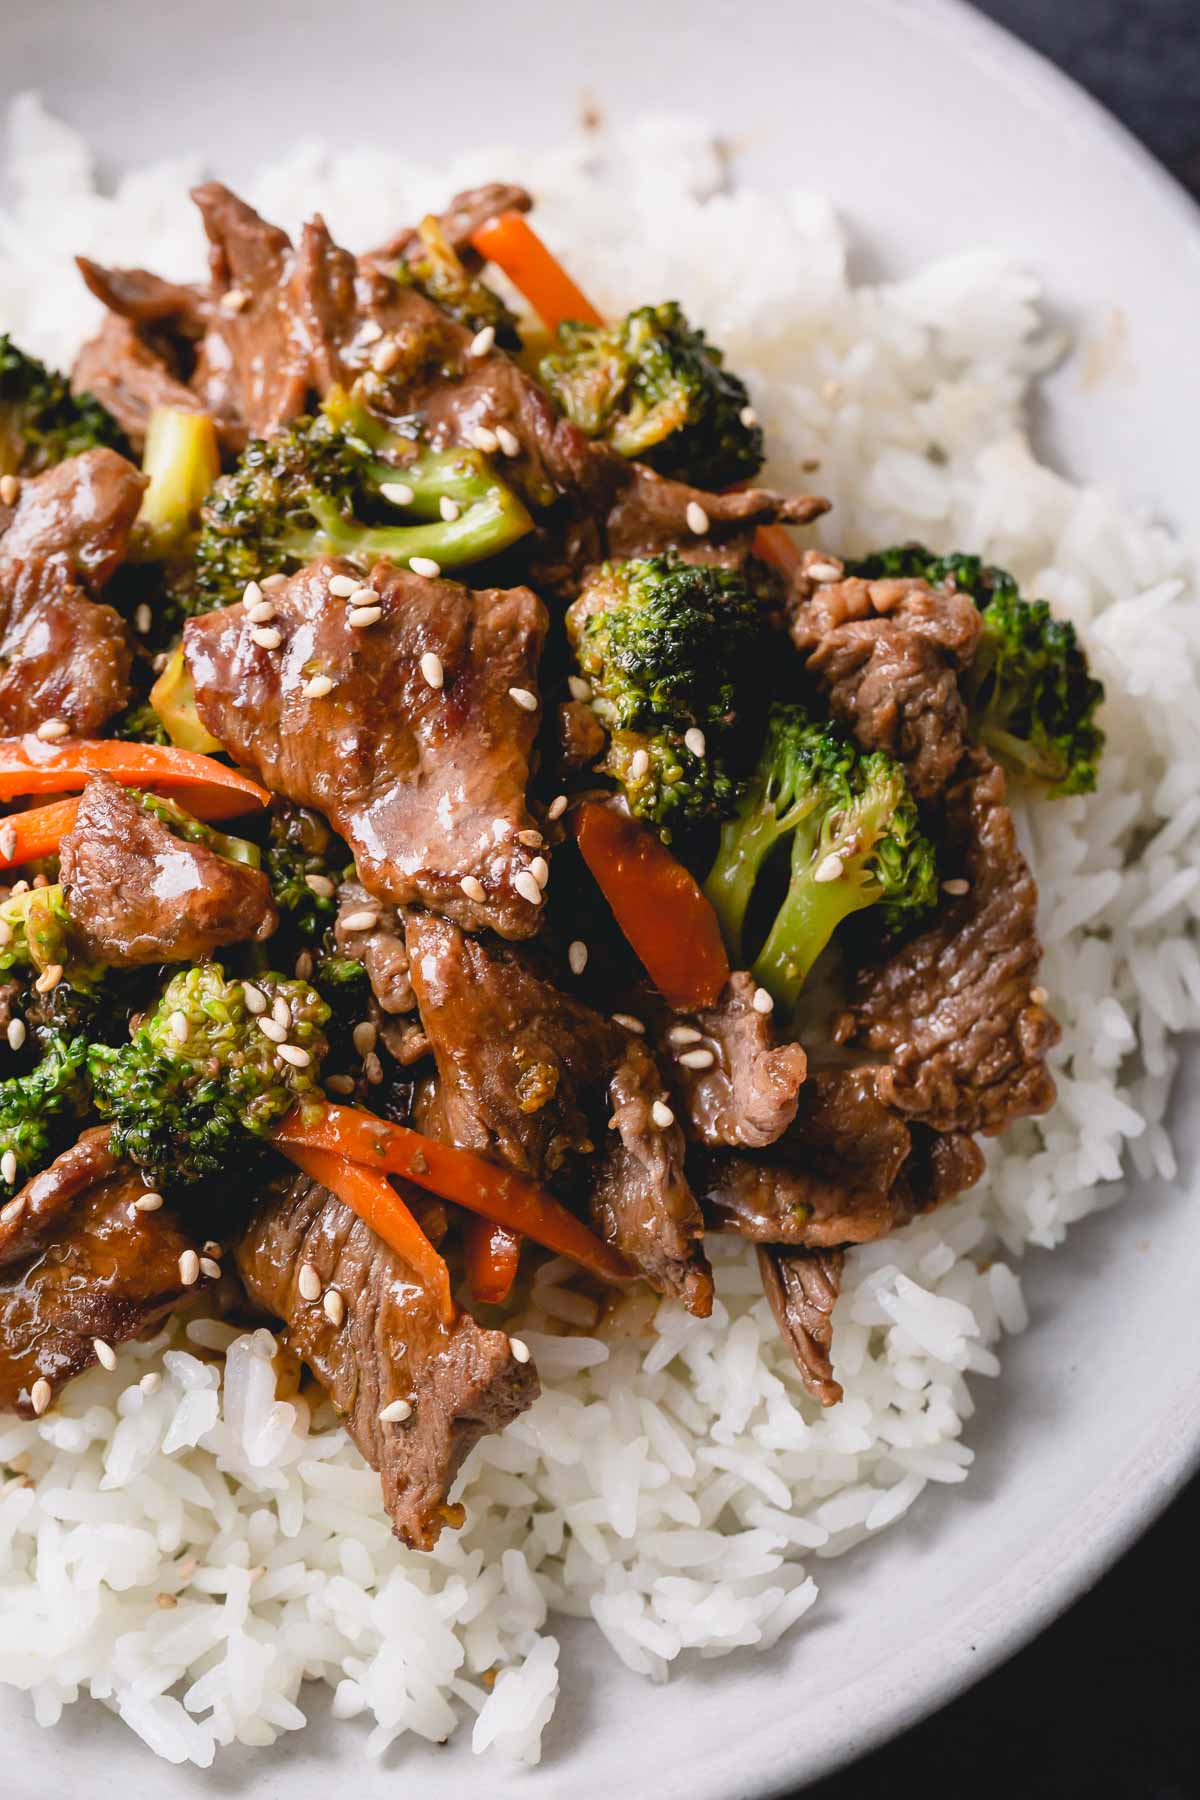 Beef and broccoli stir fry on a white plate with carrots, broccoli, and white rice.